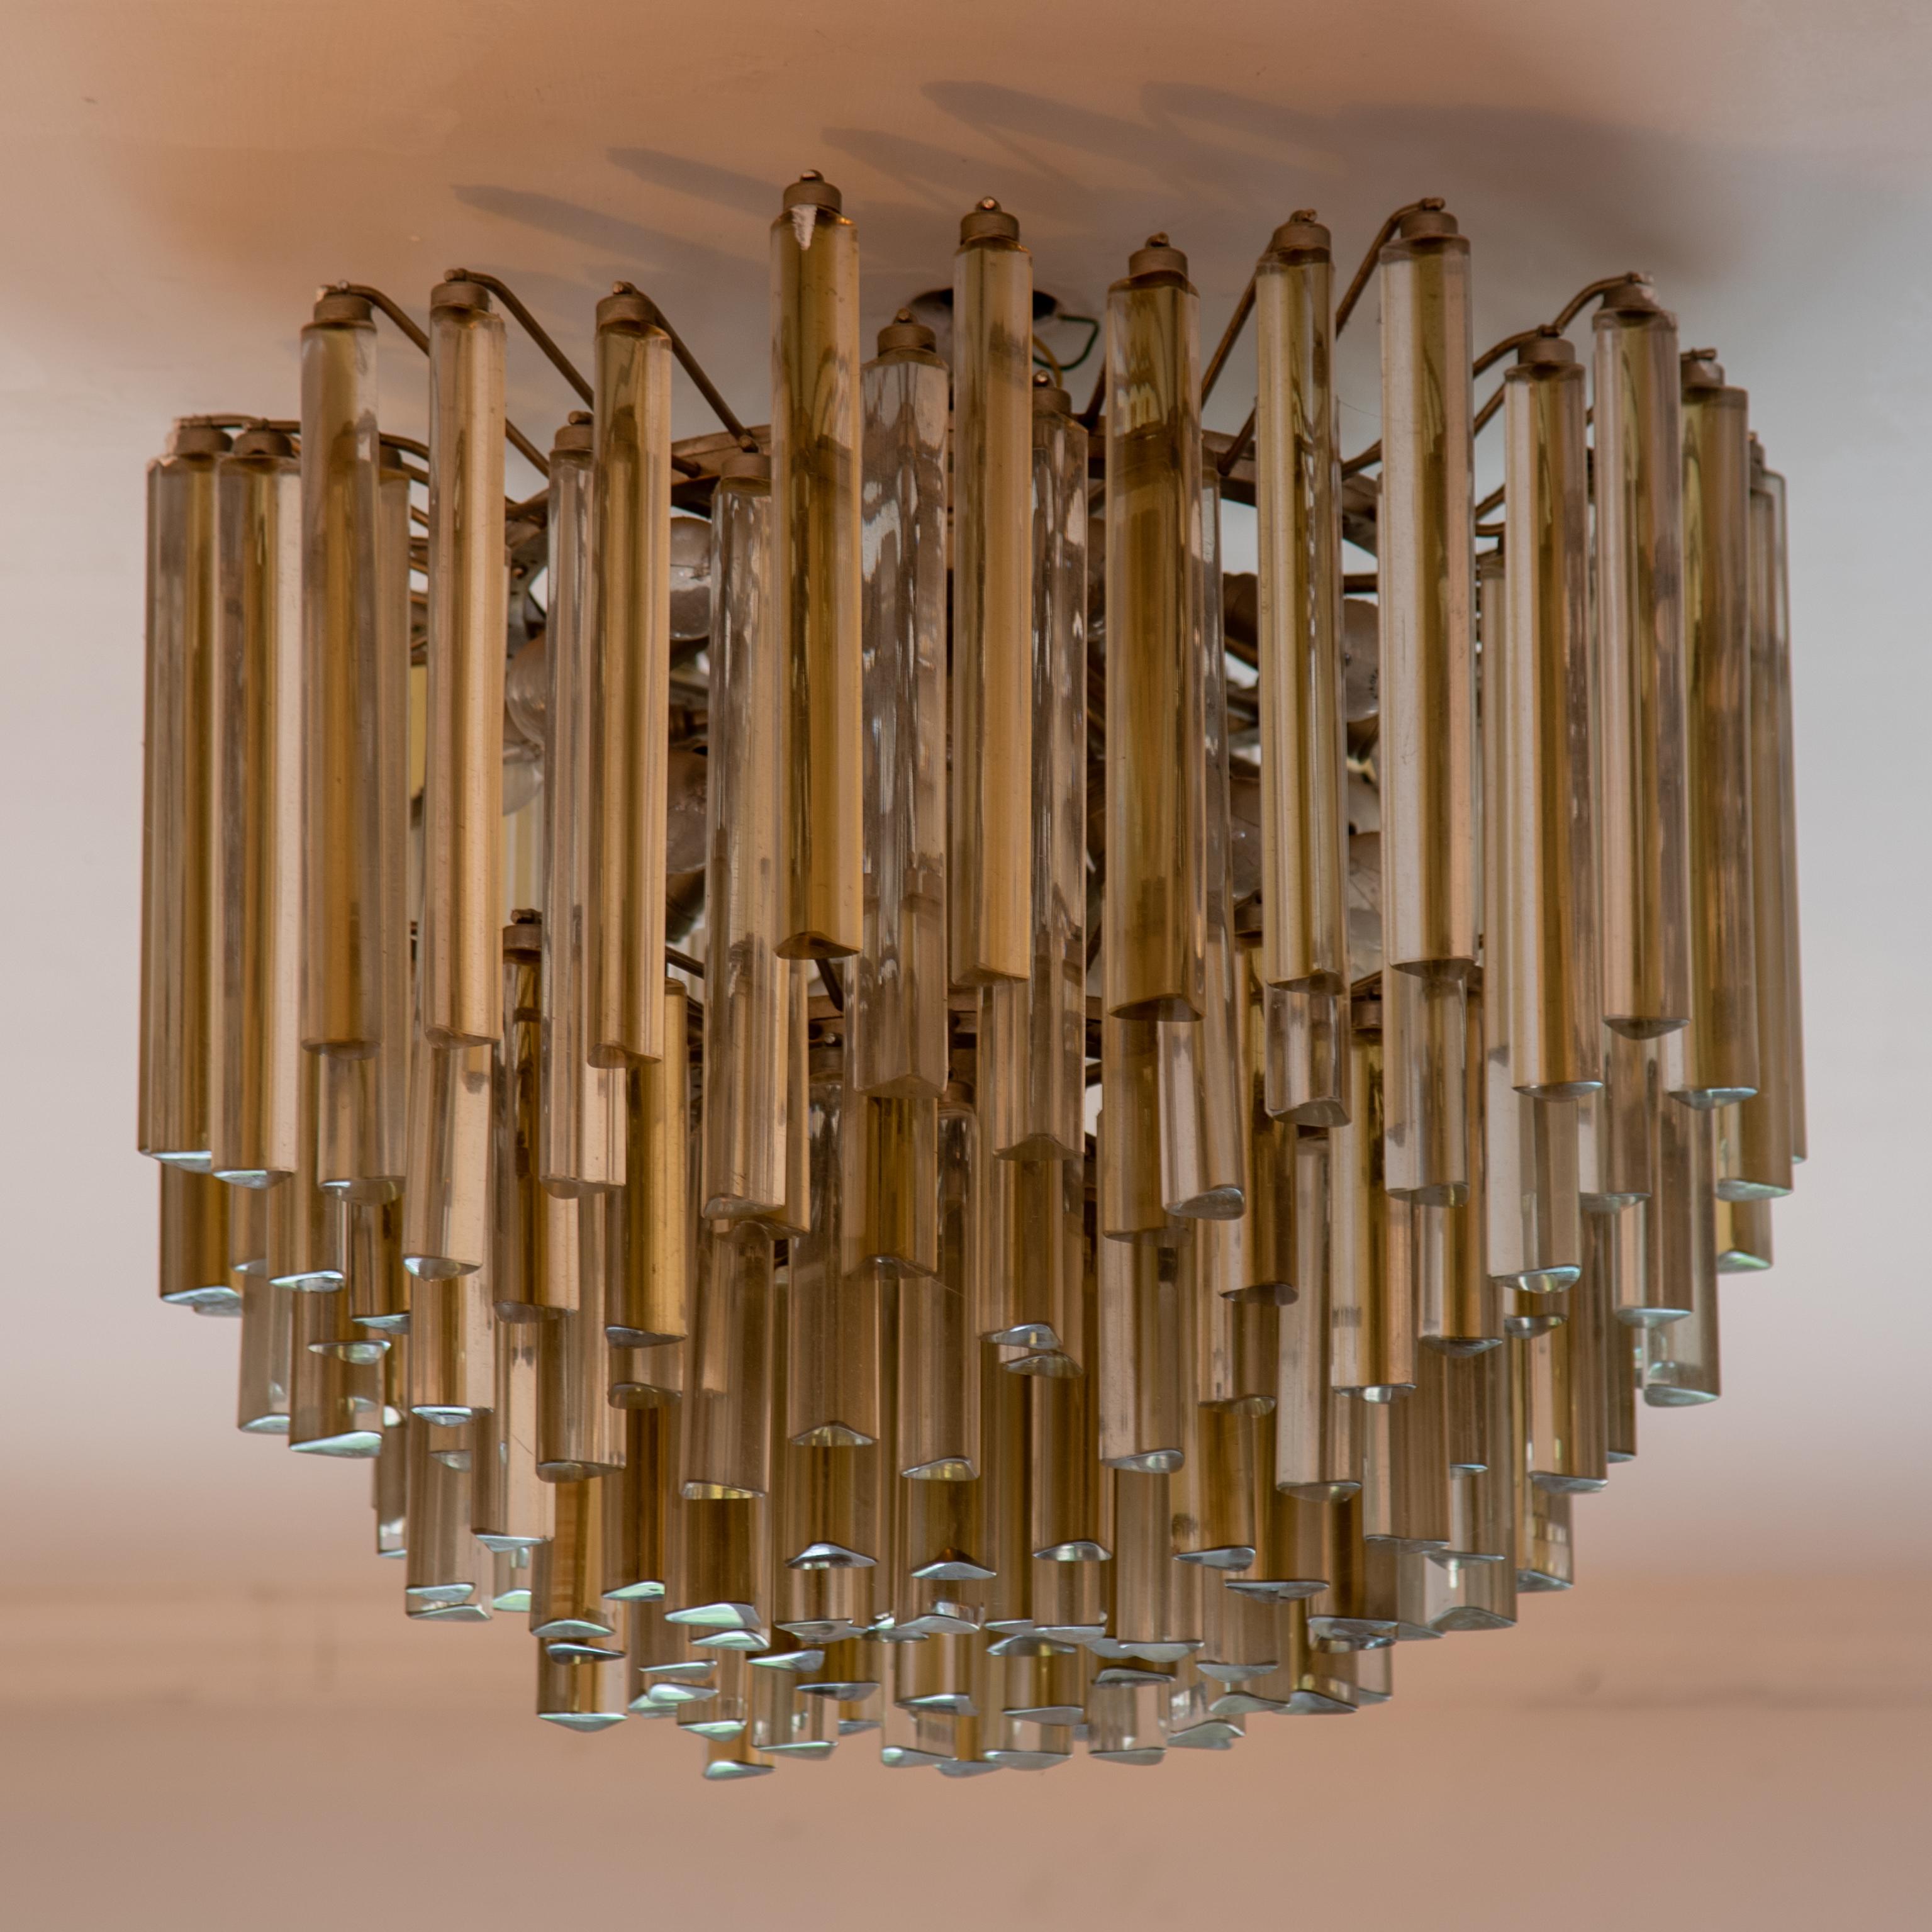 Pair of unique shape original 1970s Italian chandelier by Paolo Venini Murano Italy
Each chandelier features 172 two-colors gold and clear crystals descending stacked layers of triedri prisms
and hanging from hooks onto a chrome frame, 8 rows and 21